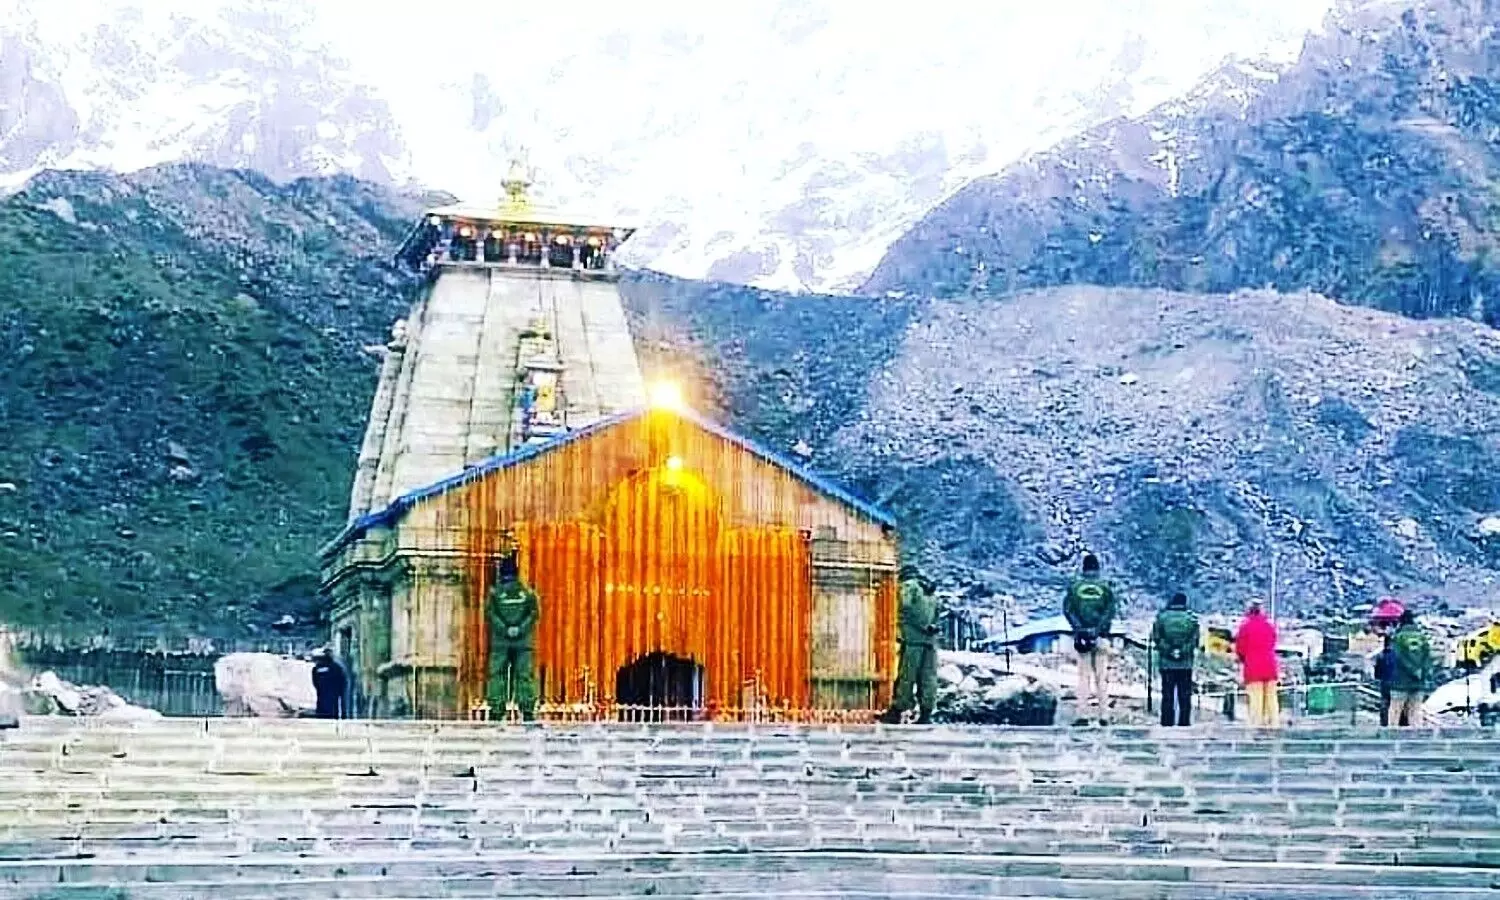 The doors of the world-famous Kedarnath shrine located in the high Himalayan region of Uttarakhand were opened at 5 am today.